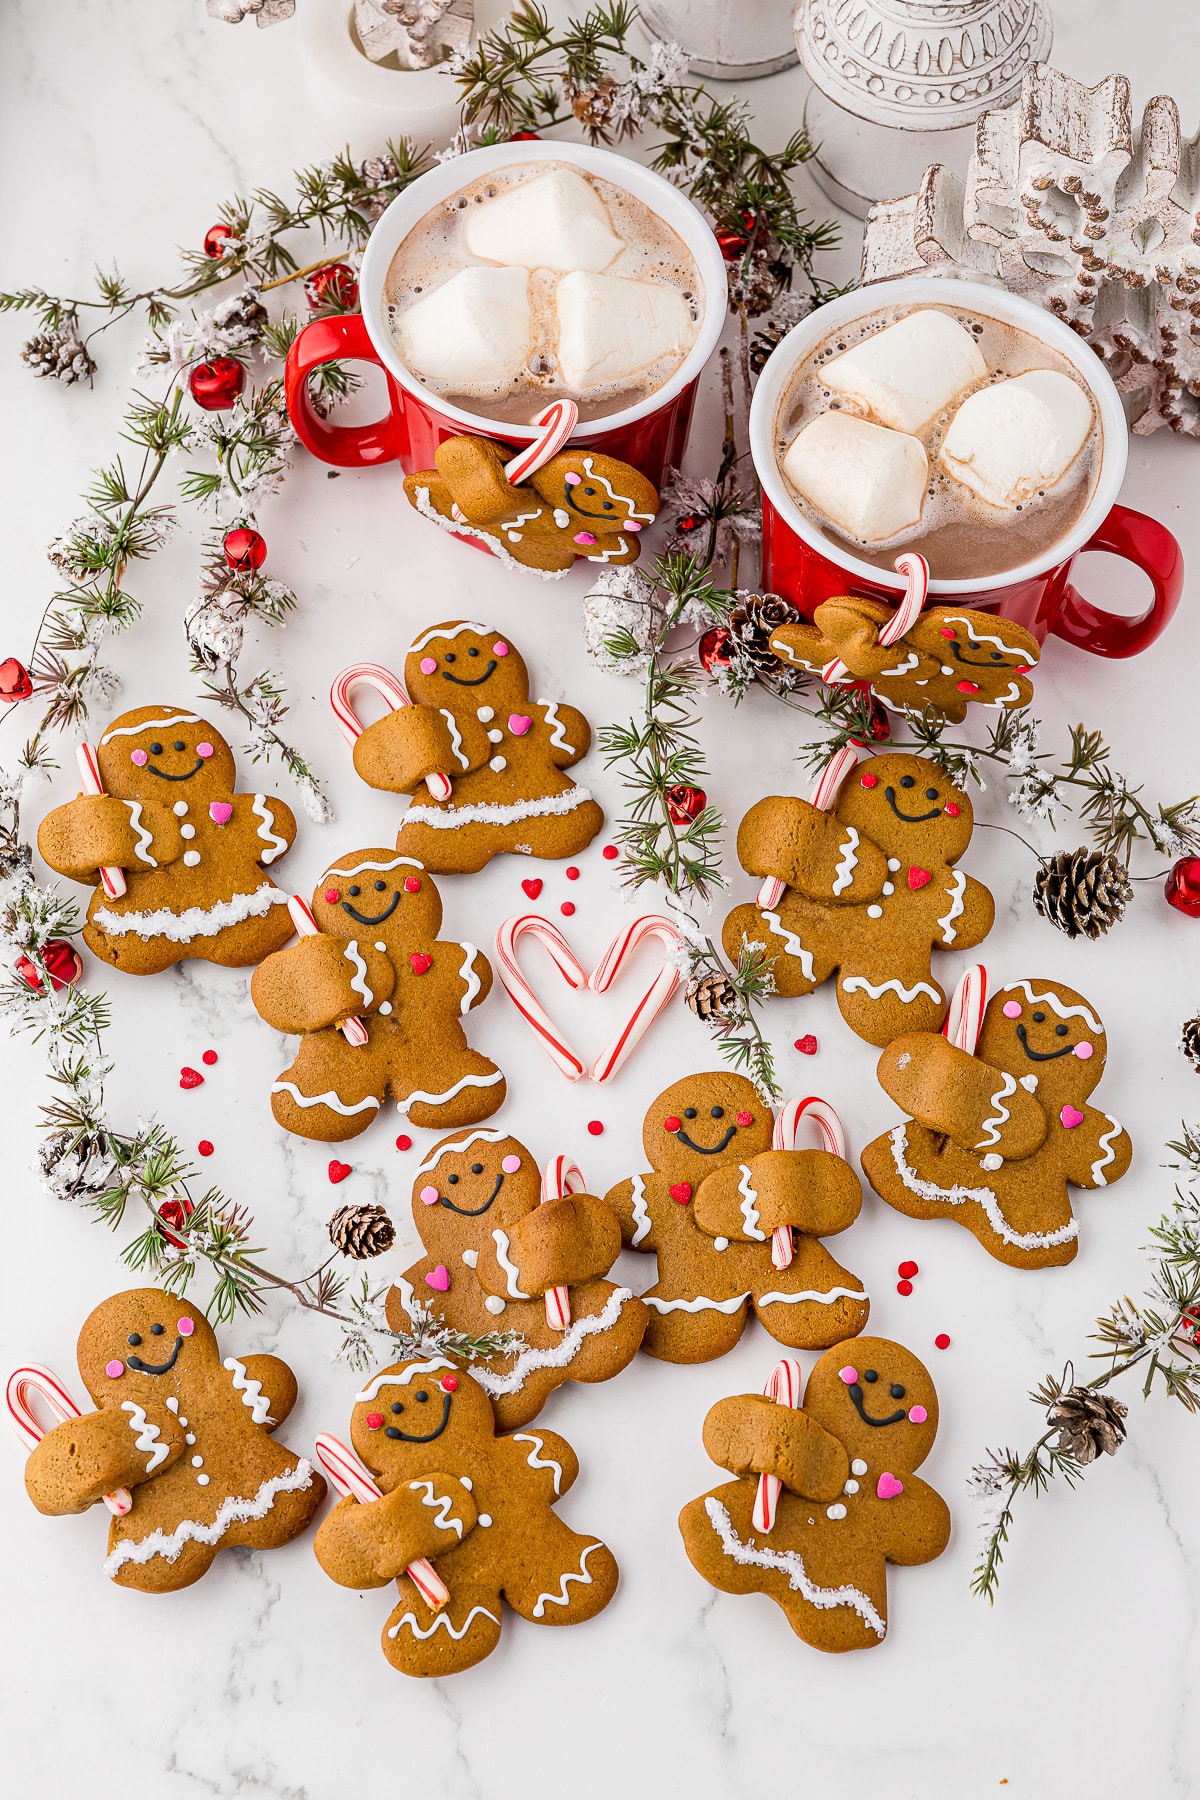 10 gingerbread men on a white counter